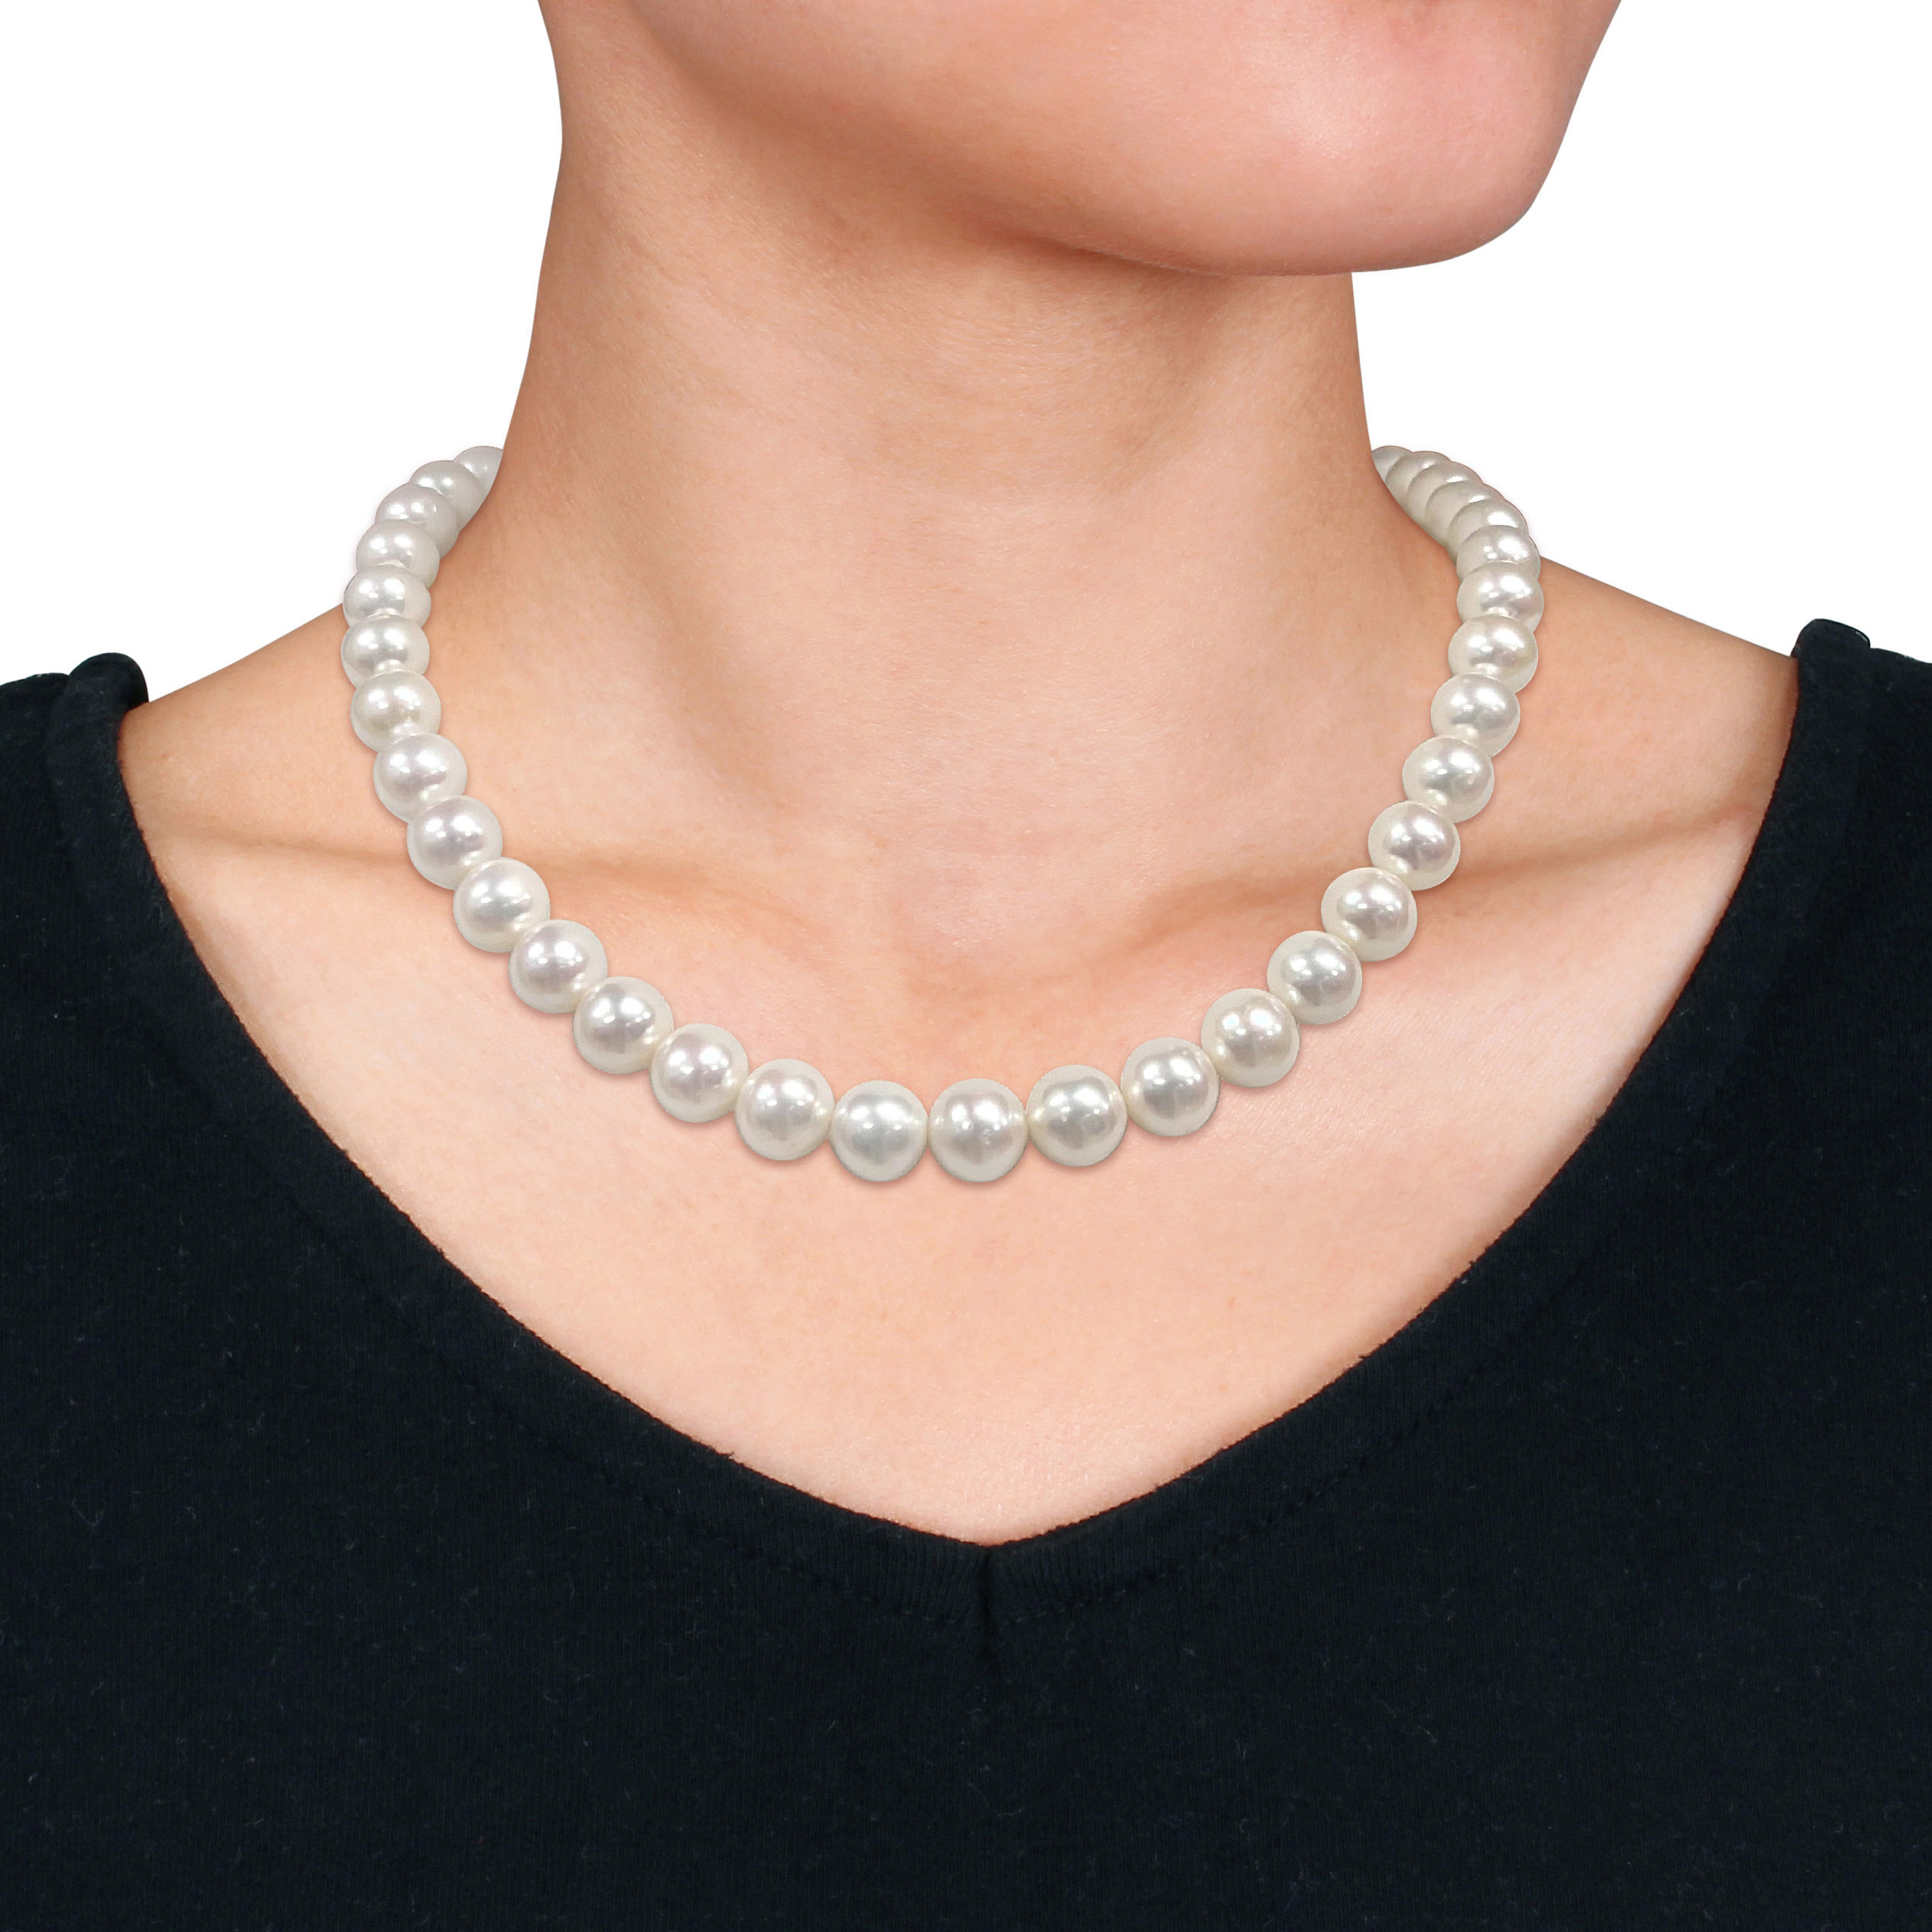 10 -12 MM South Sea Pearl Strand Necklace with 14k White Gold Clasp - 18 in